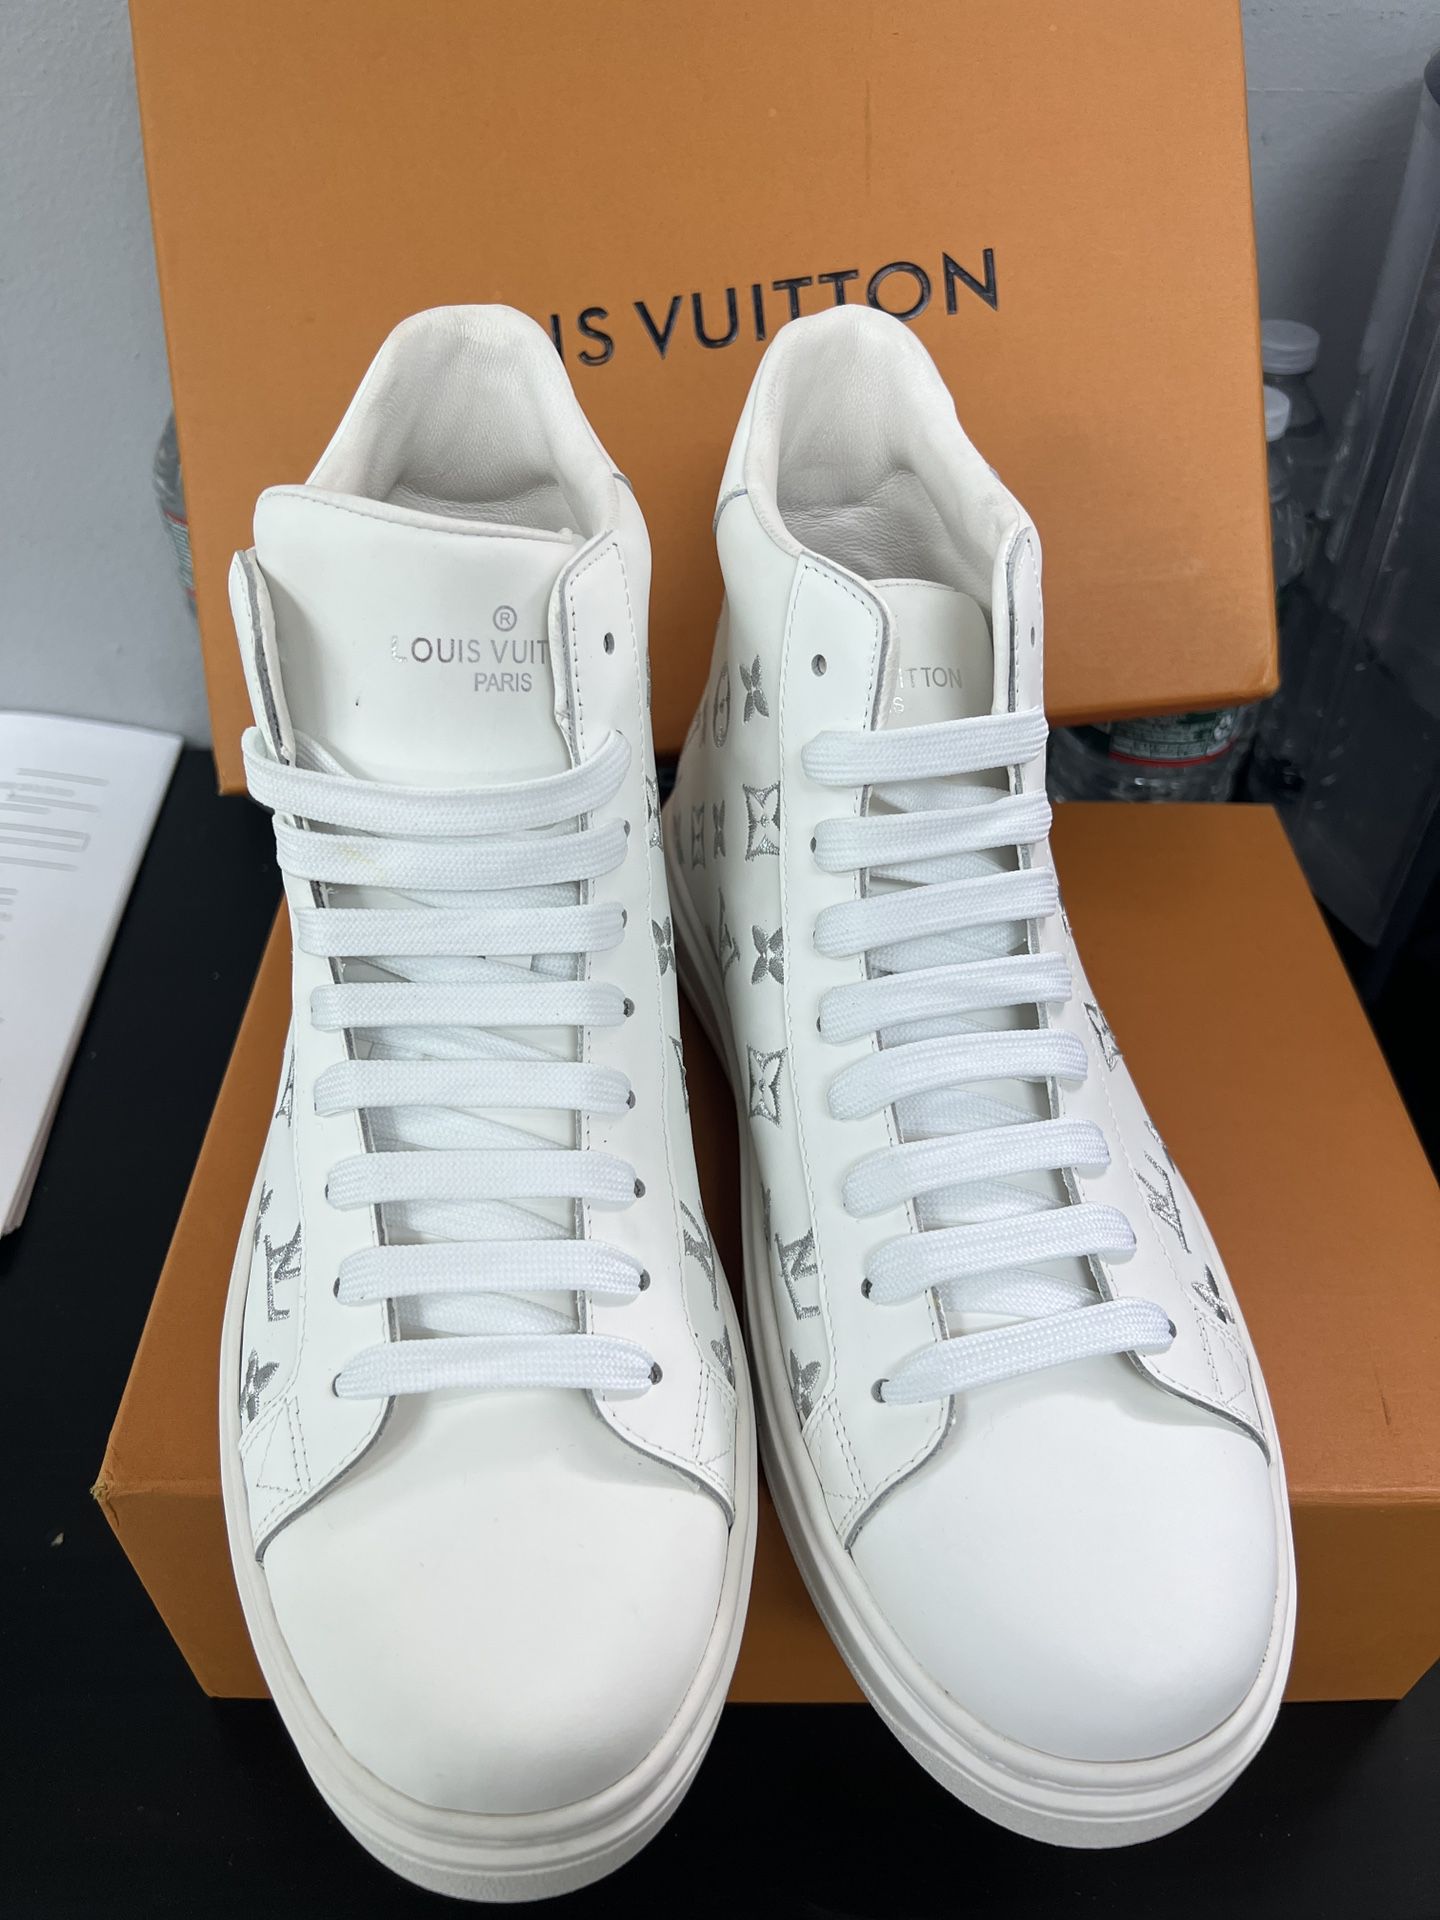 Louis Vuitton Shoes for Sale in Duluth, GA - OfferUp